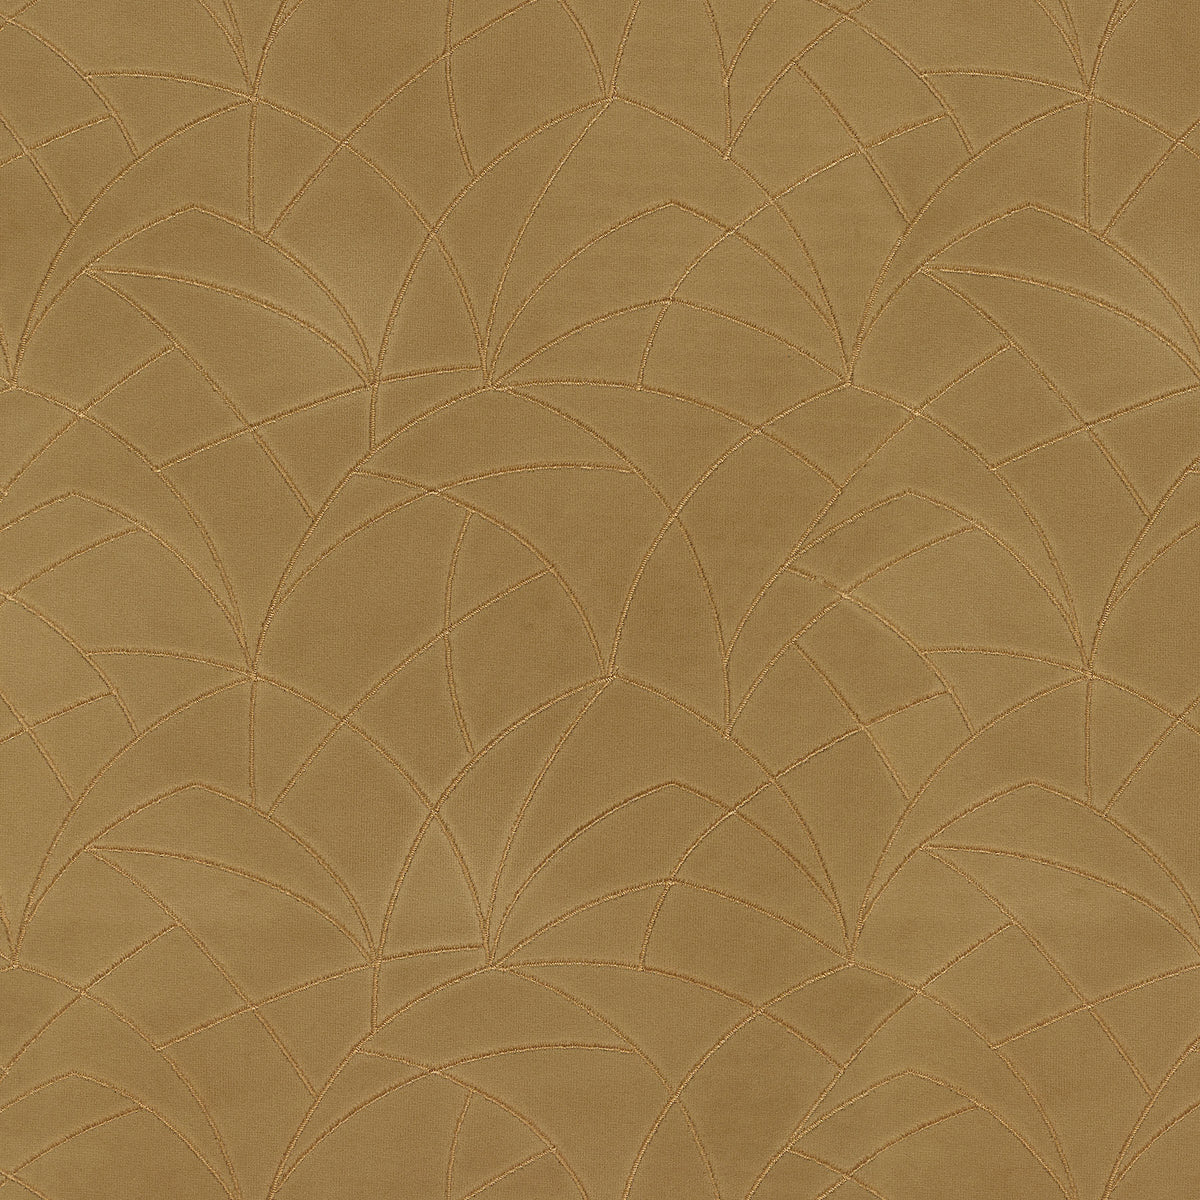 P/K Lifestyles Curvature Embroidery - Golden 411274 Upholstery Fabric